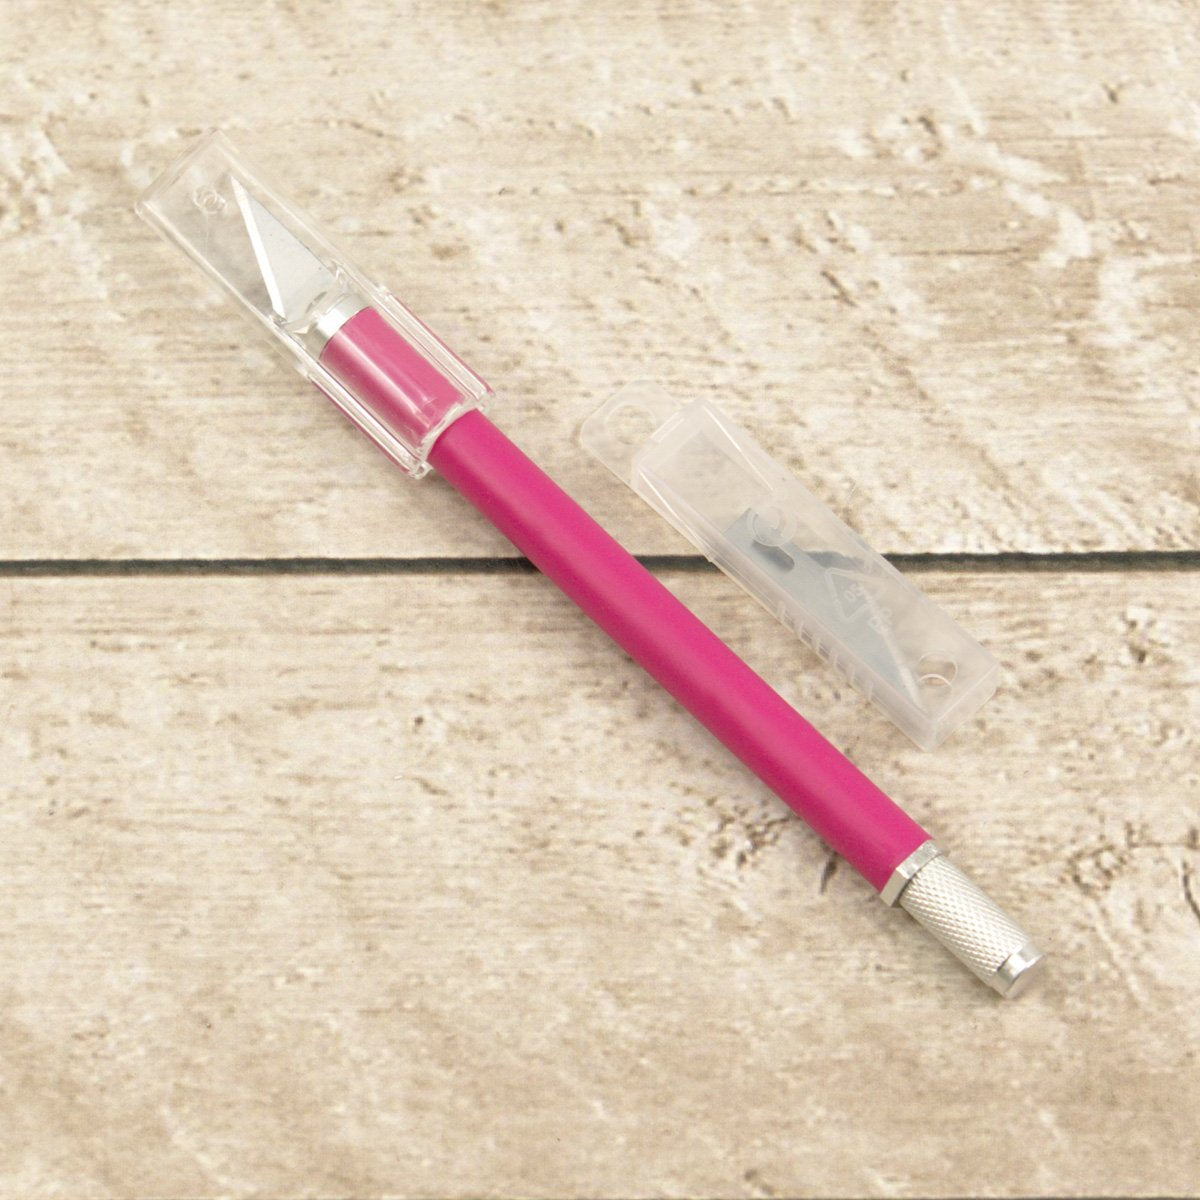 Precision Craft Knife with pink rubber handle